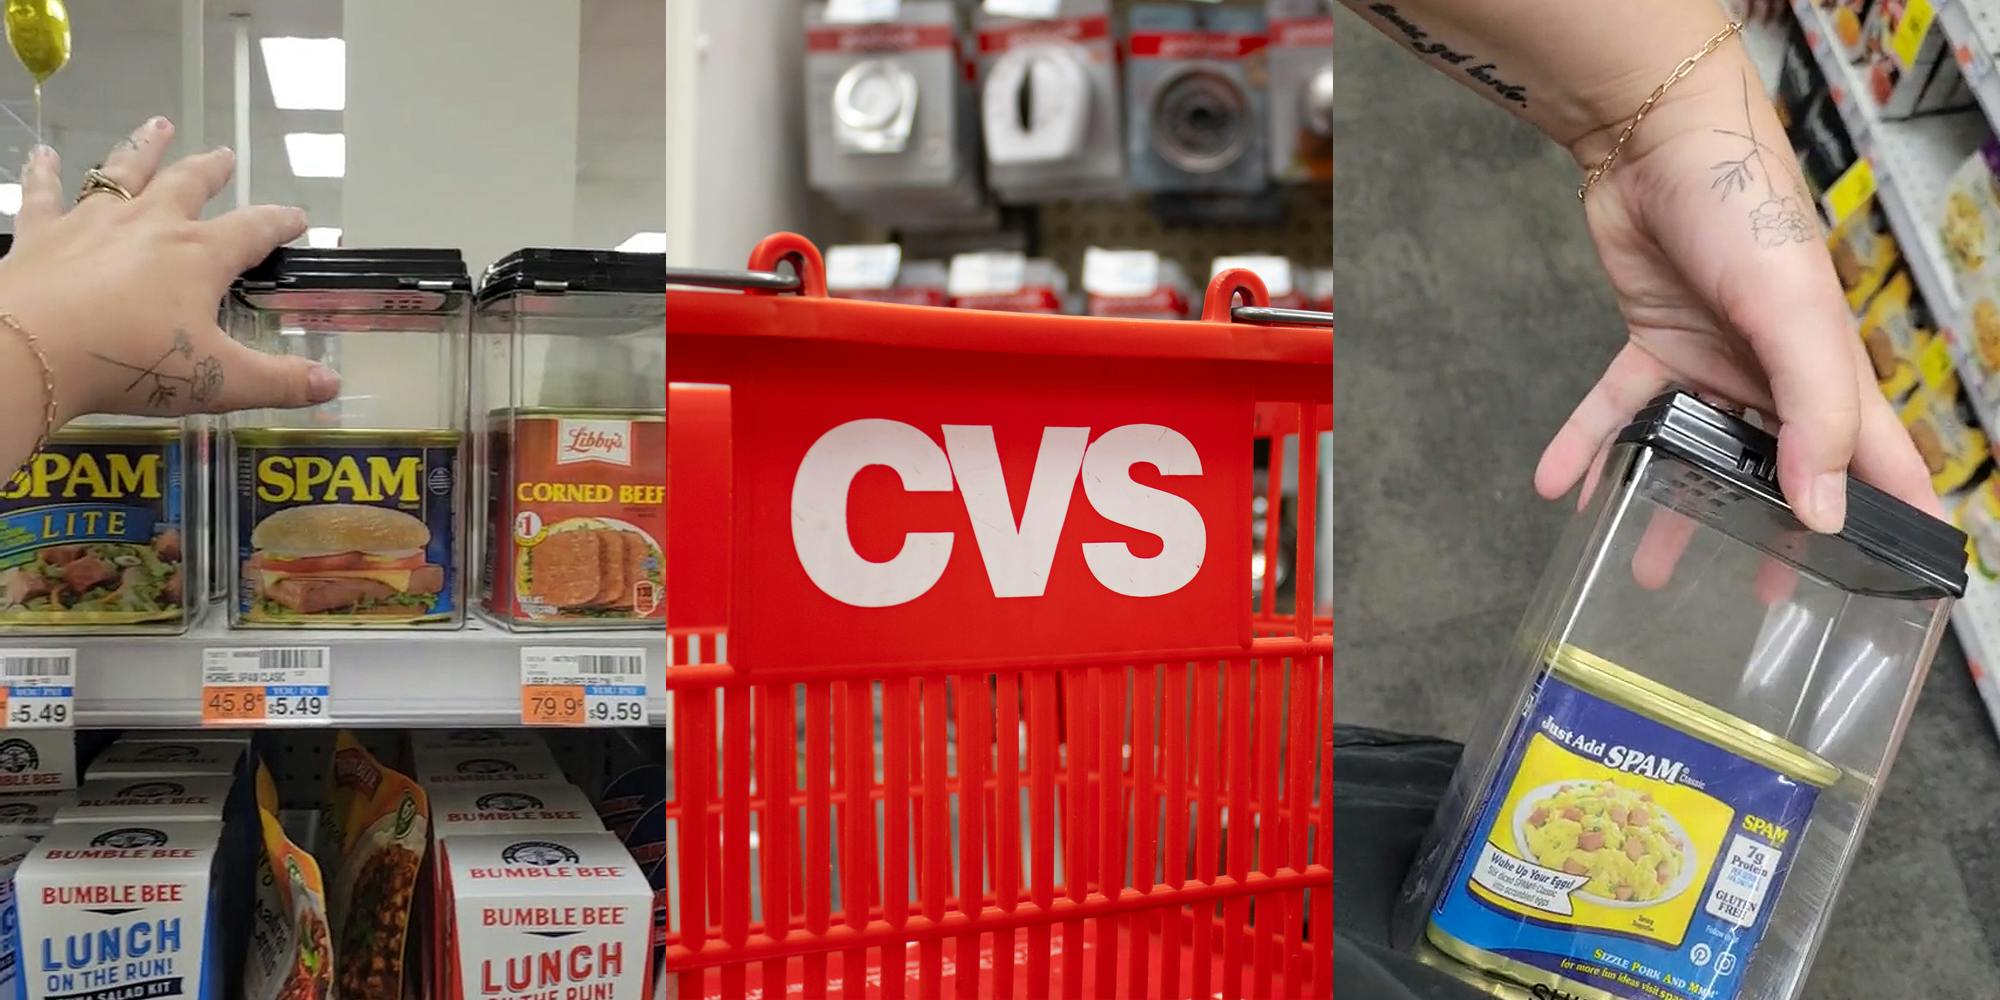 CVS Deals: What to Buy and What to Avoid at All Costs